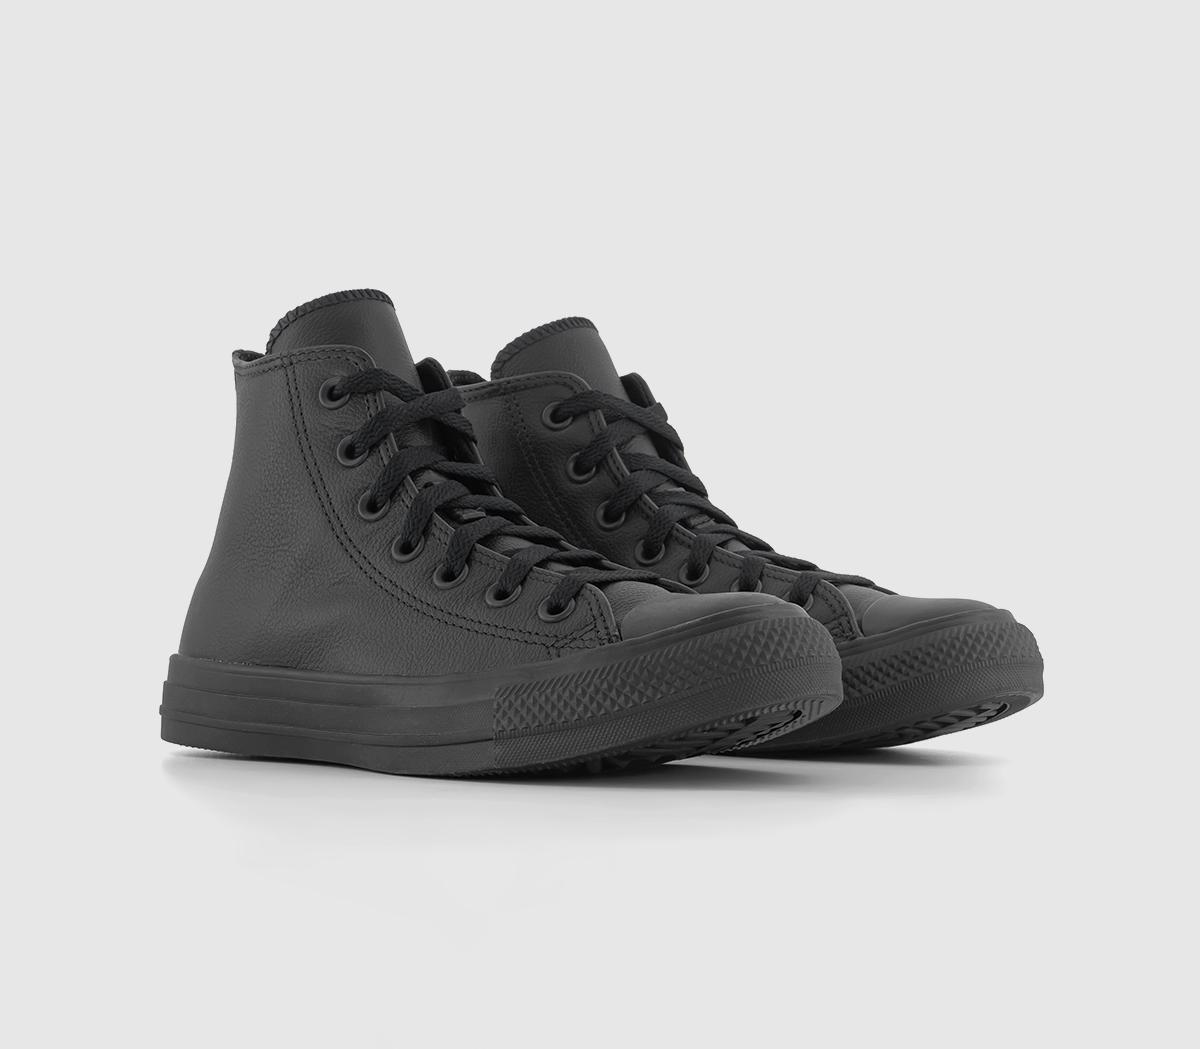 Converse Black Leather All Star High Trainers, 3